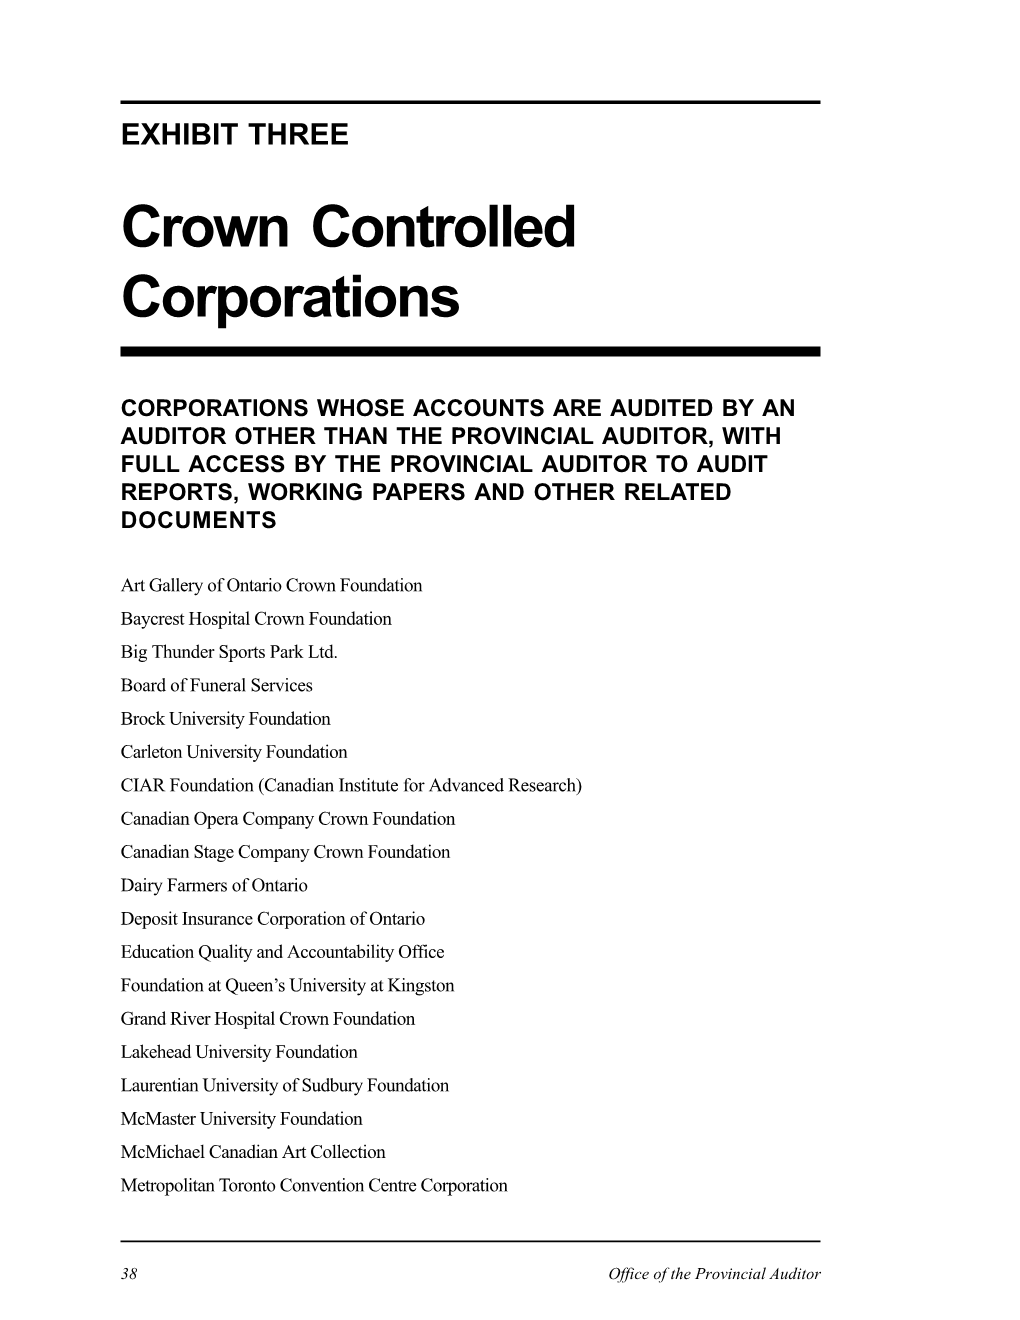 Crown Controlled Corporations